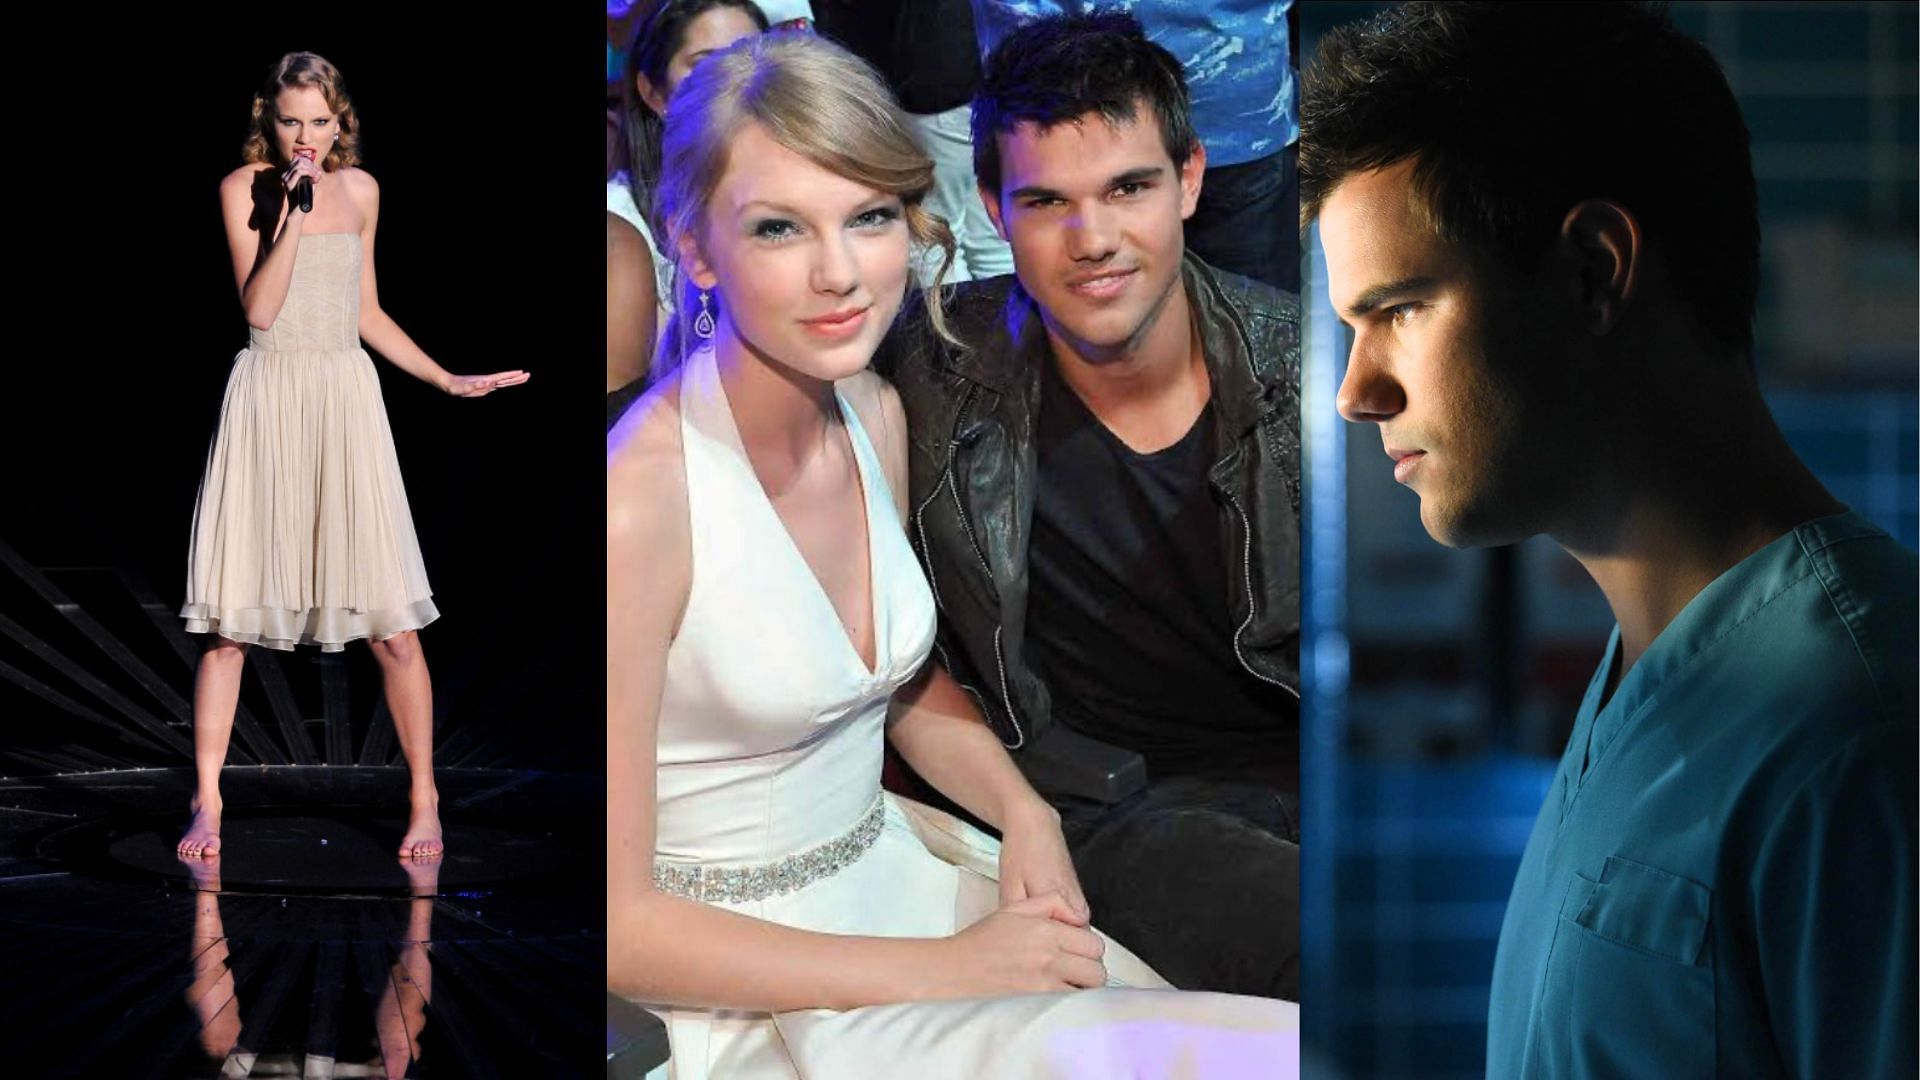 Swift and Lautner dated for a while in 2009 (Image via Michael Becker, X@SilviaShiki, and X@Vince Bucci)